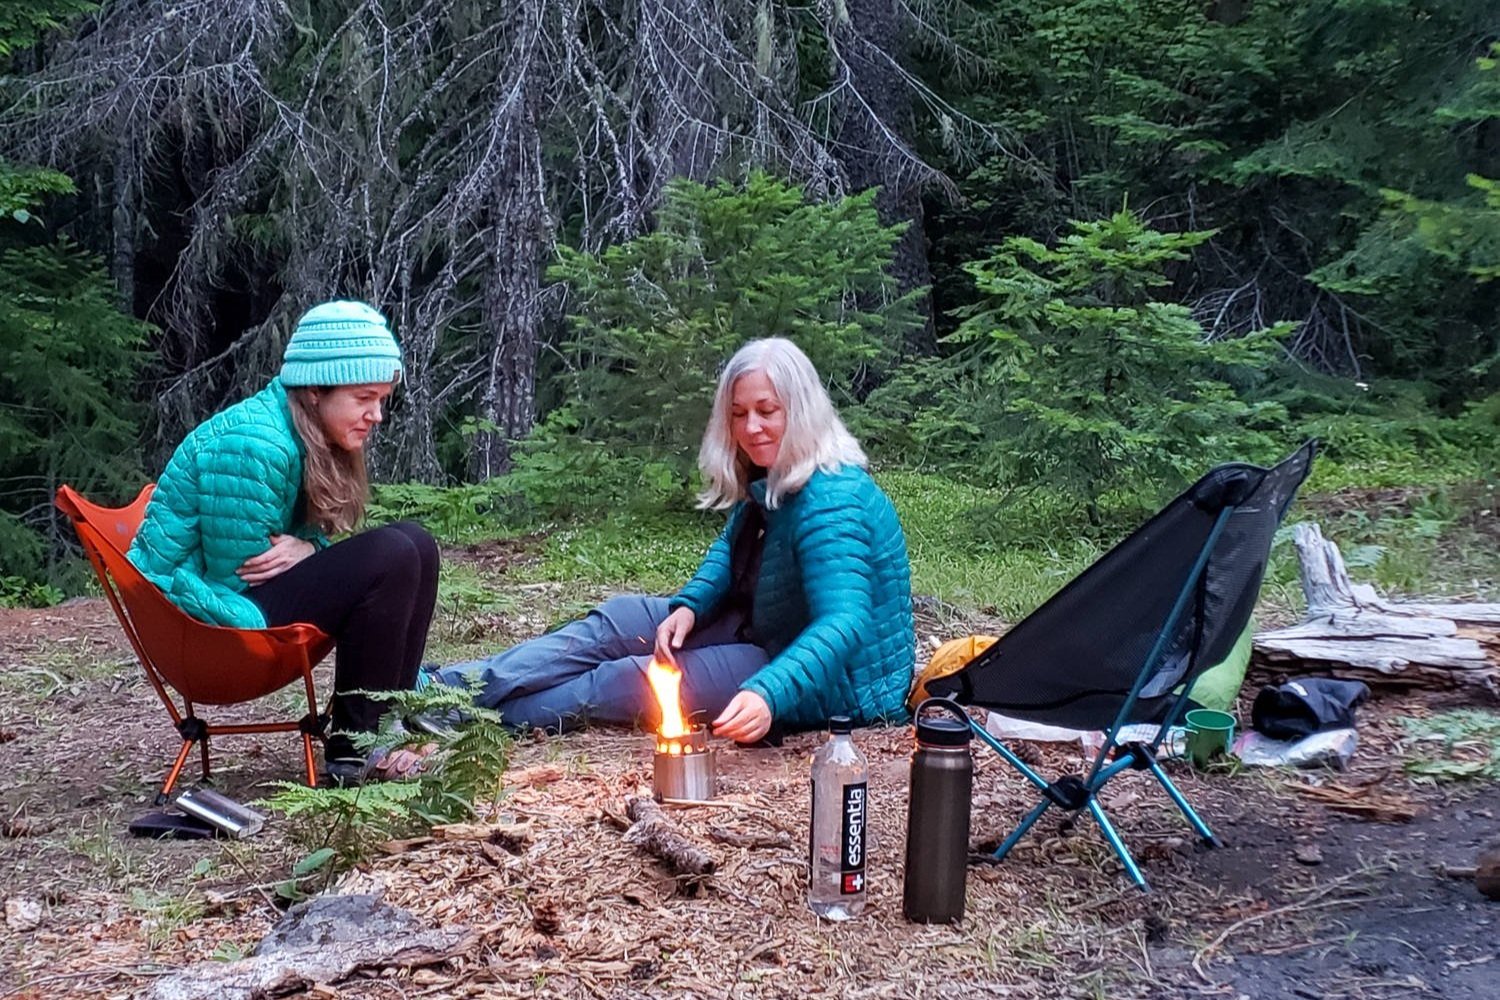 Two people in a forest sitting next to a fire in the Solo Stove Campfire Stove